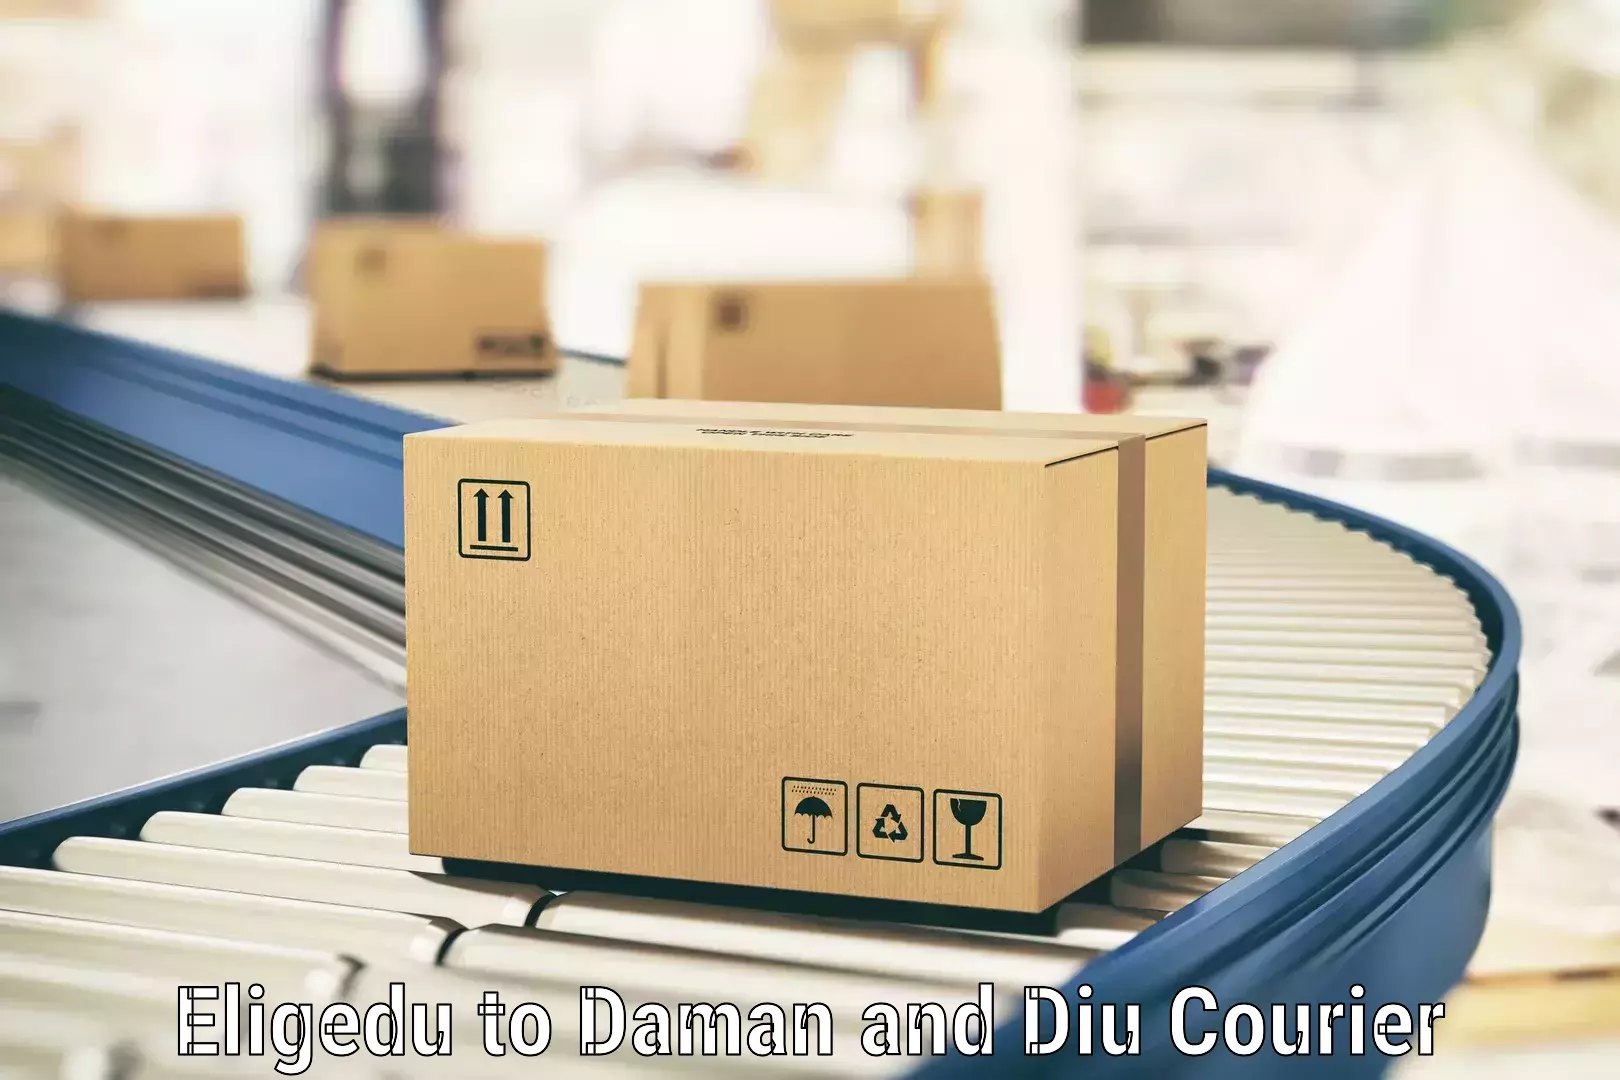 Comprehensive parcel tracking in Eligedu to Diu